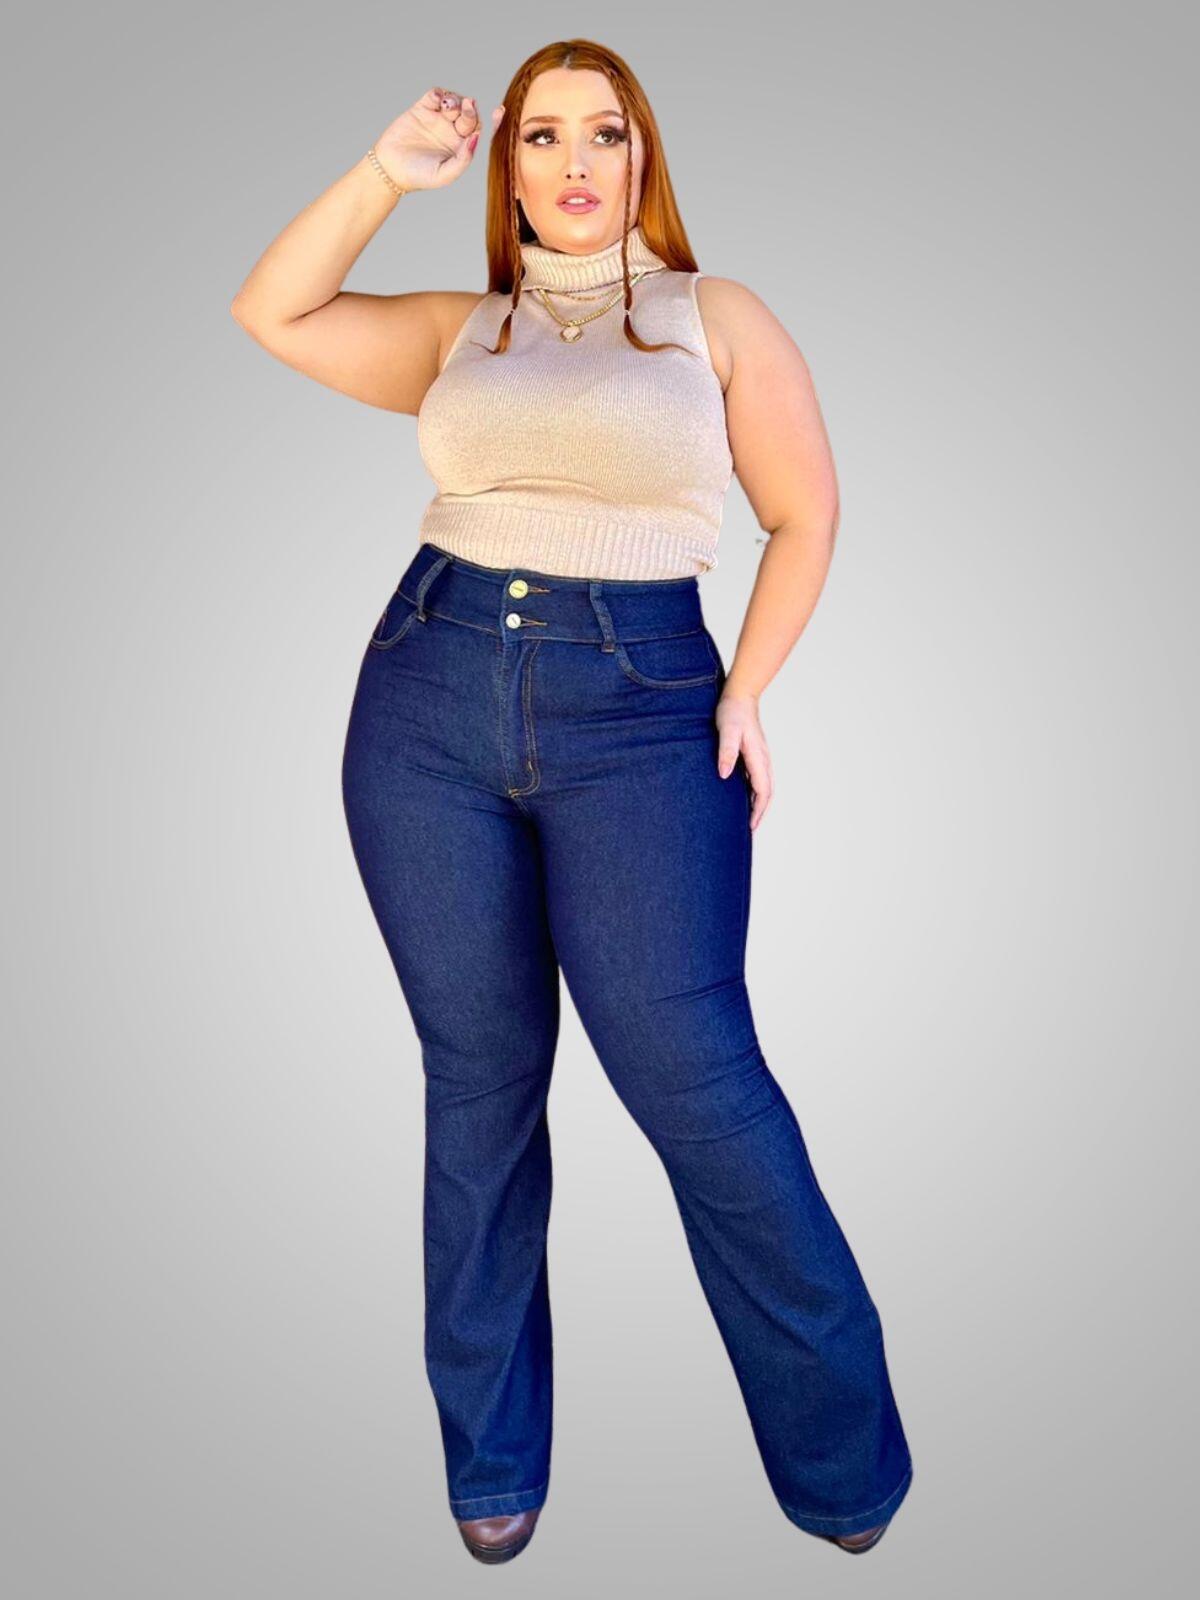 Style With Plus Size Flare Jeans